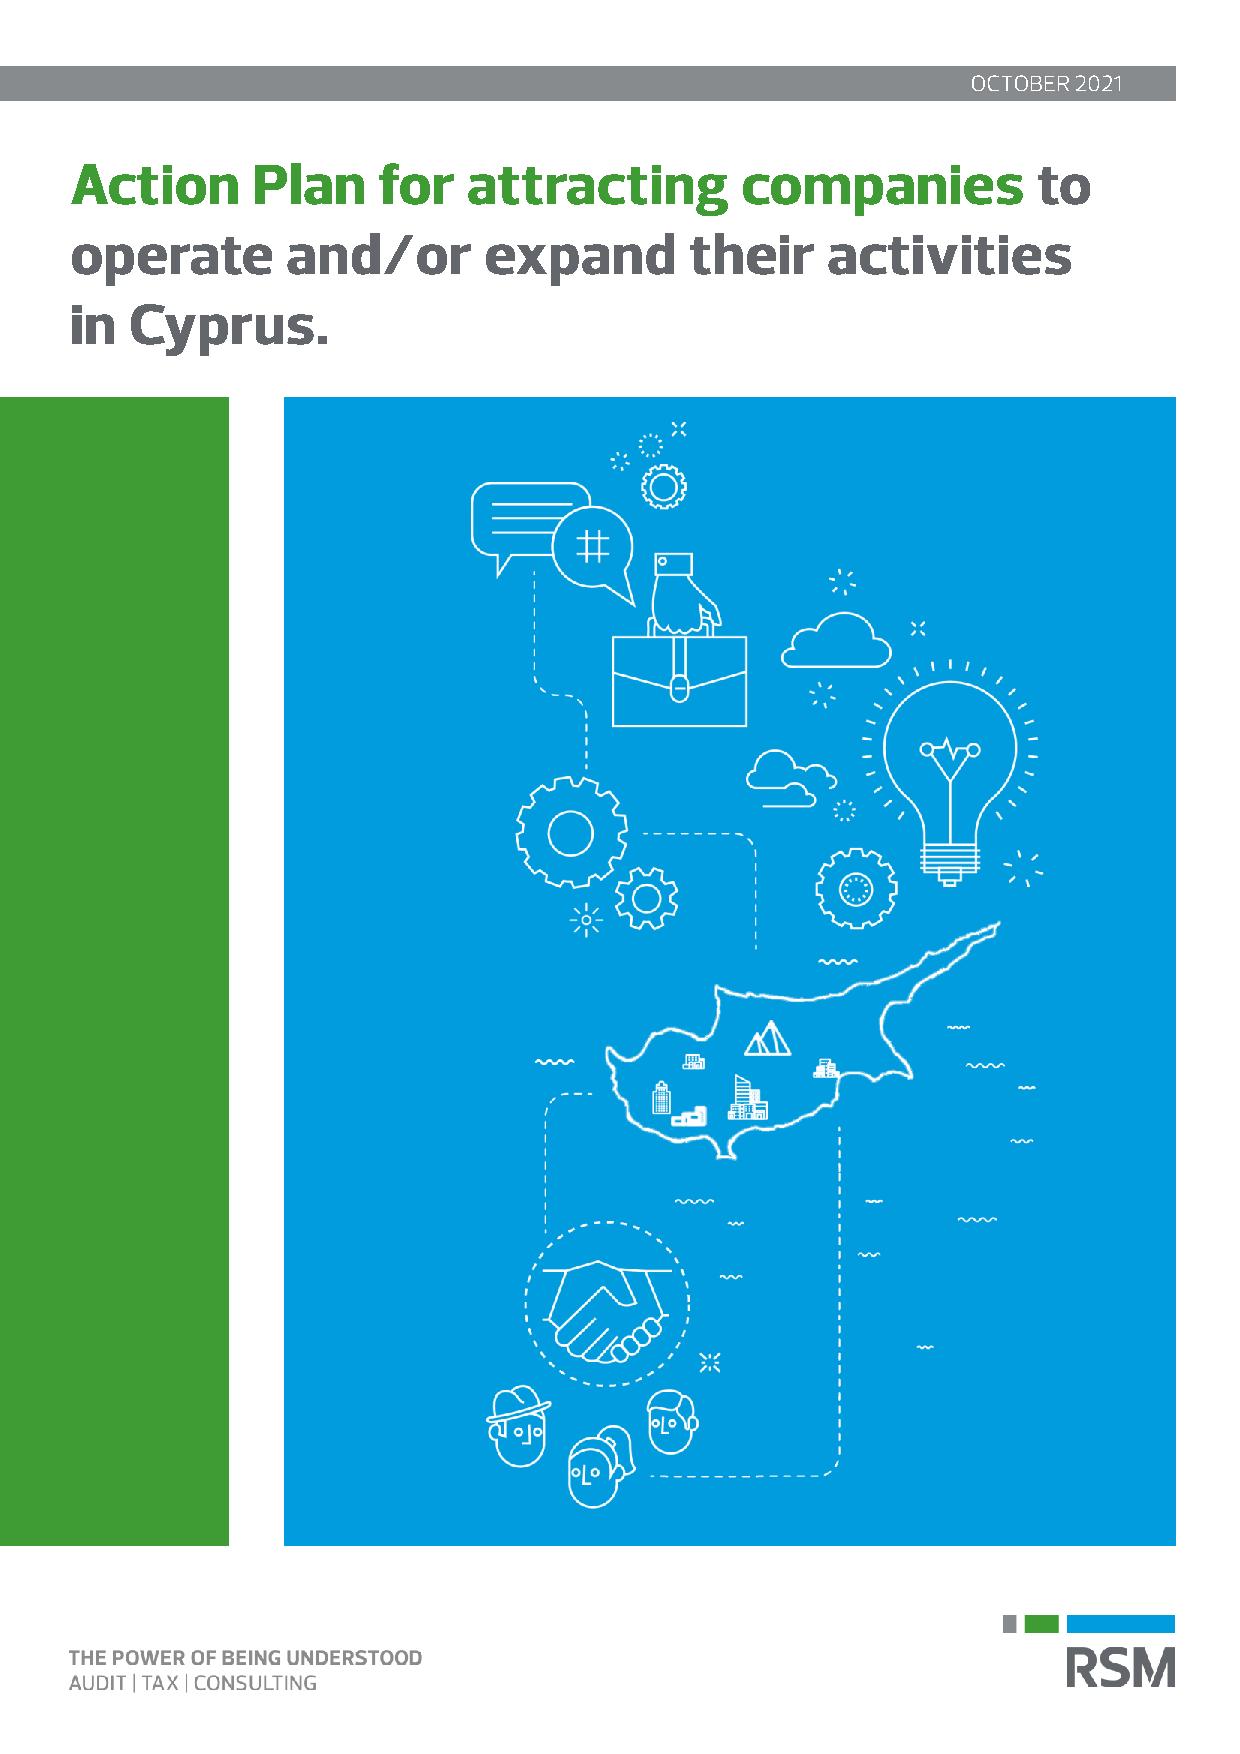 Action plan for attracting companies to operate and/or expand their activities in Cyprus.